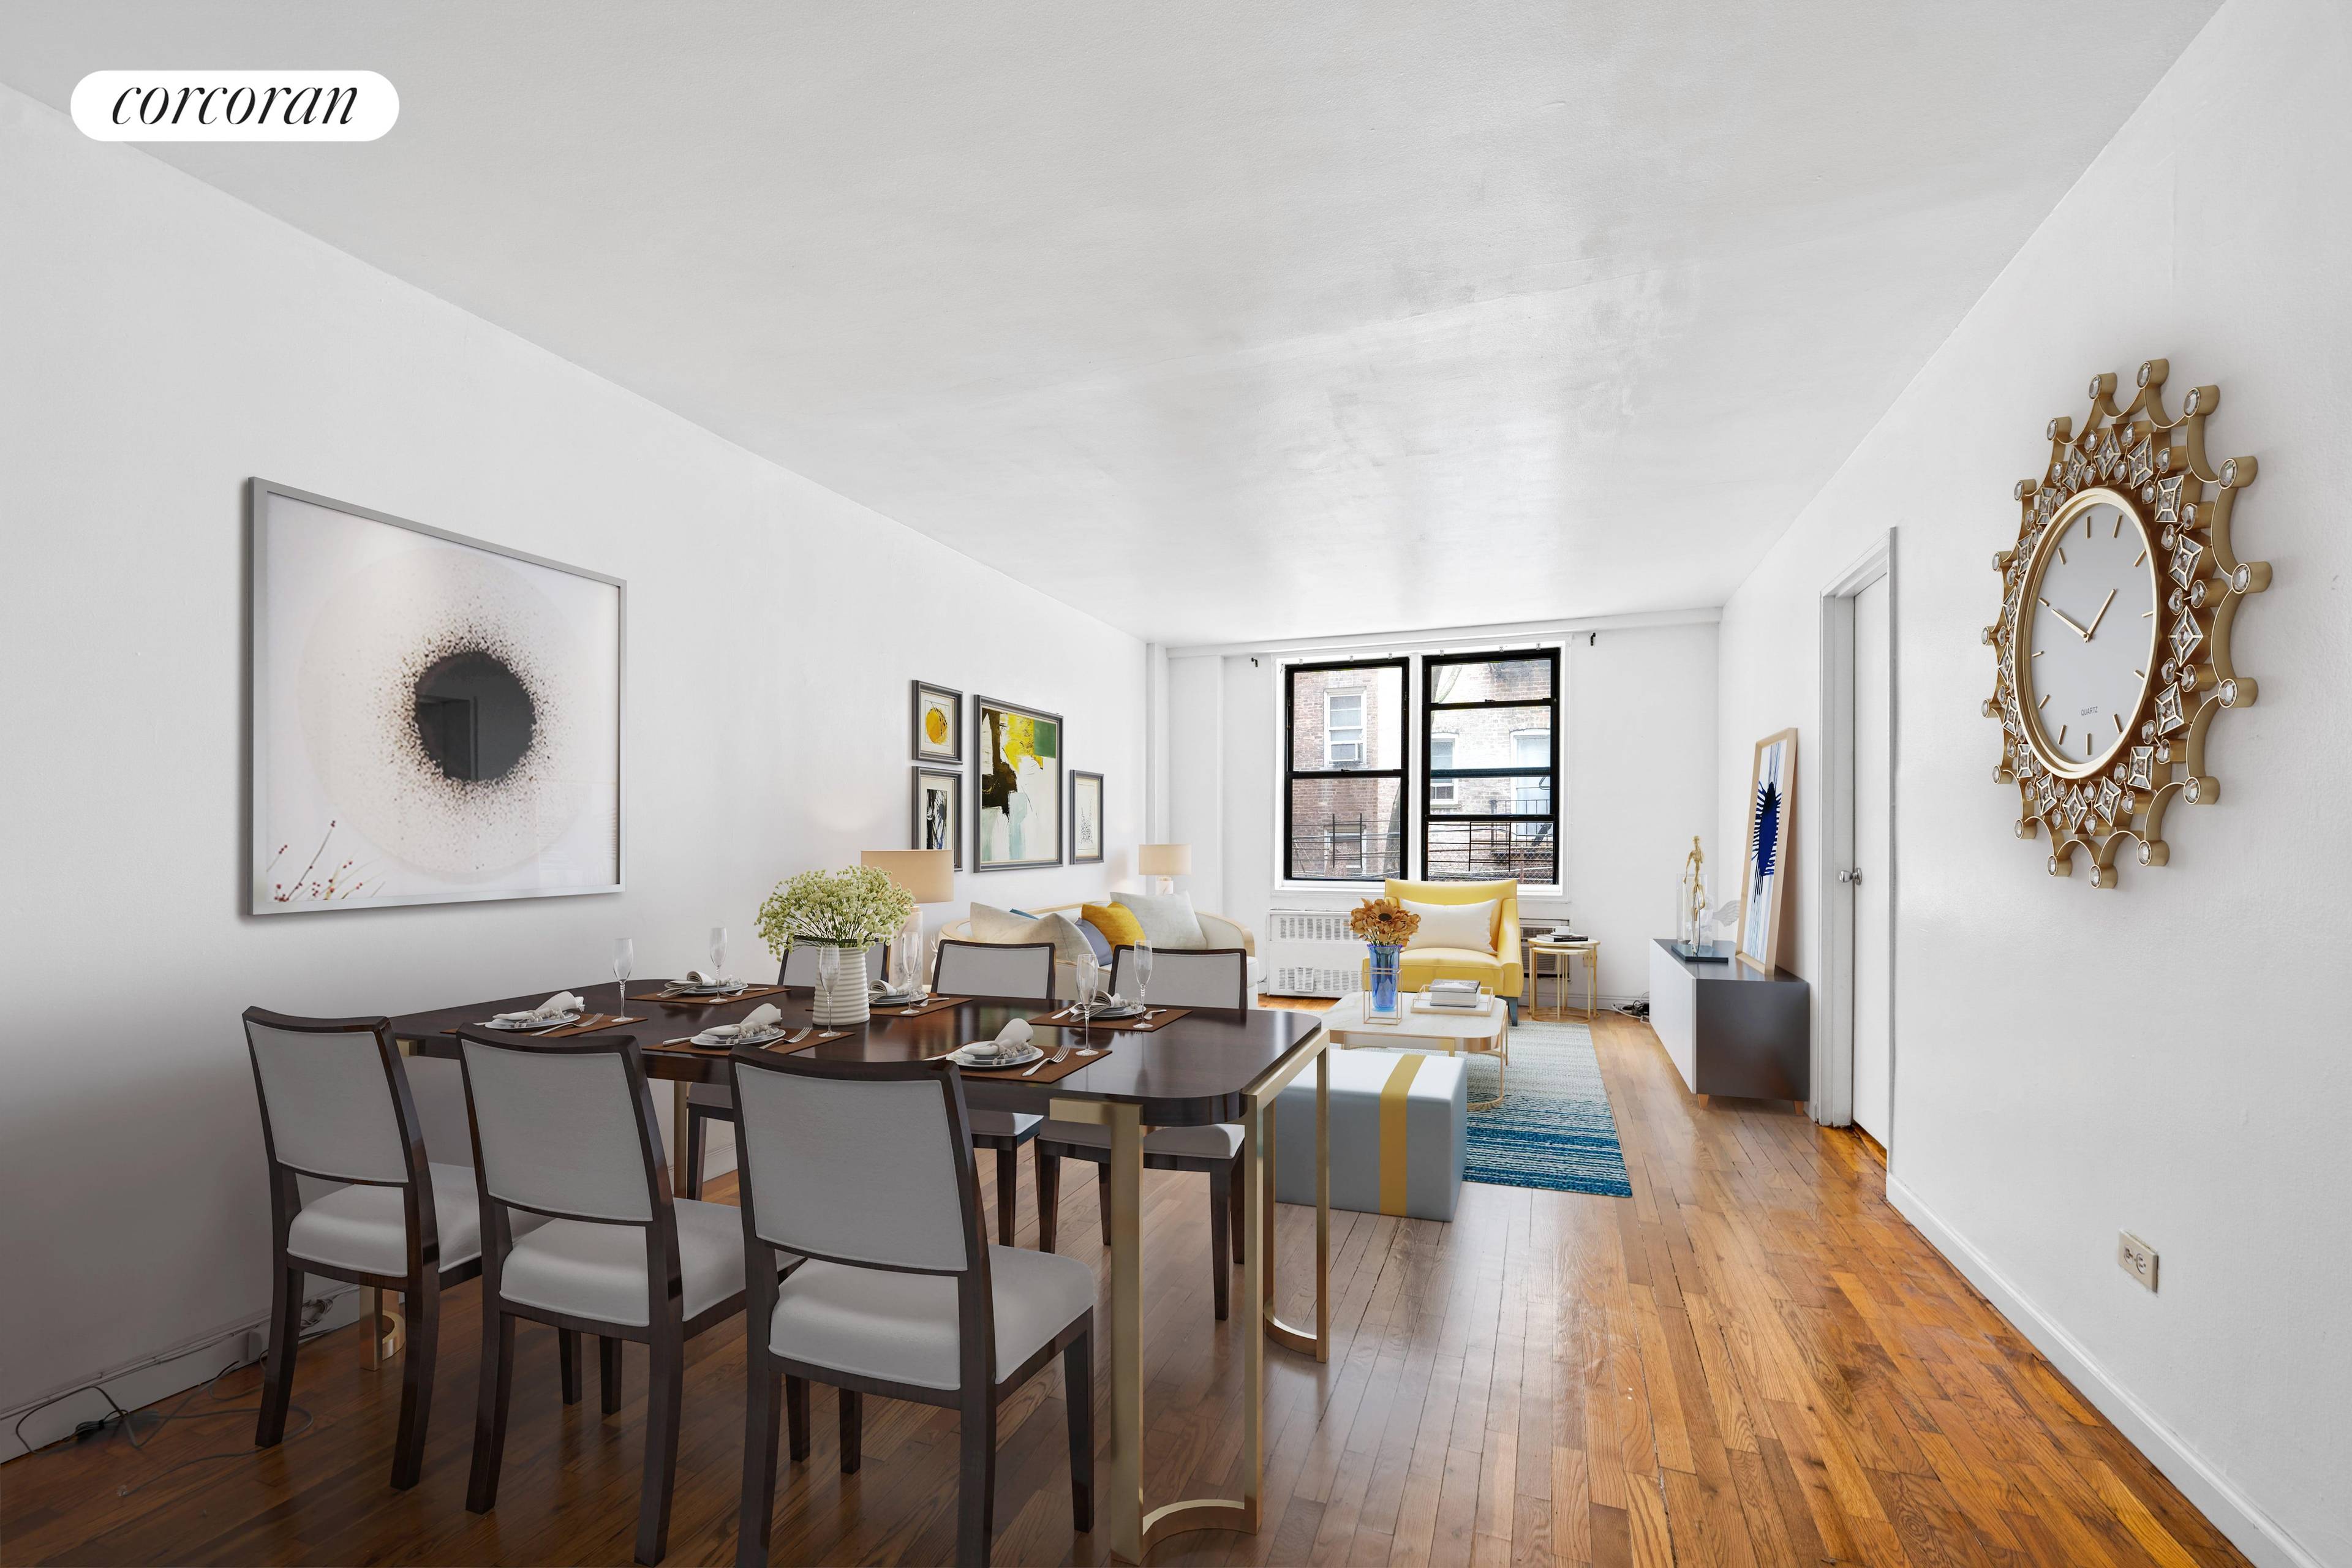 This insanely spacious two bedroom in Kensington is certainly a charmer and won't break the bank.